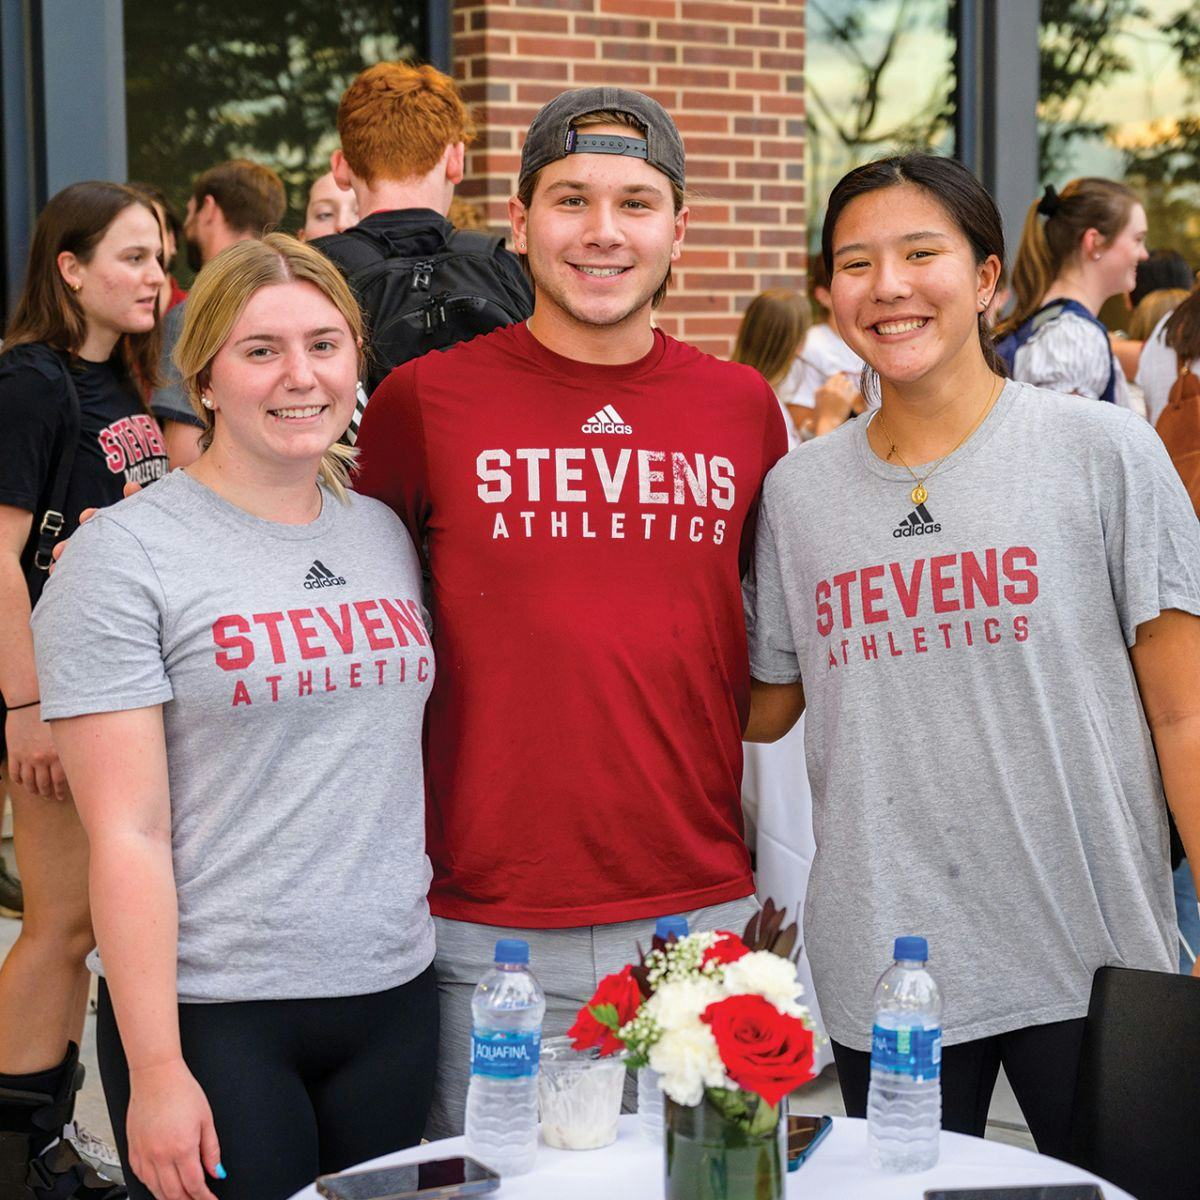 Three student athletes smile for camera at a celebration on campus.